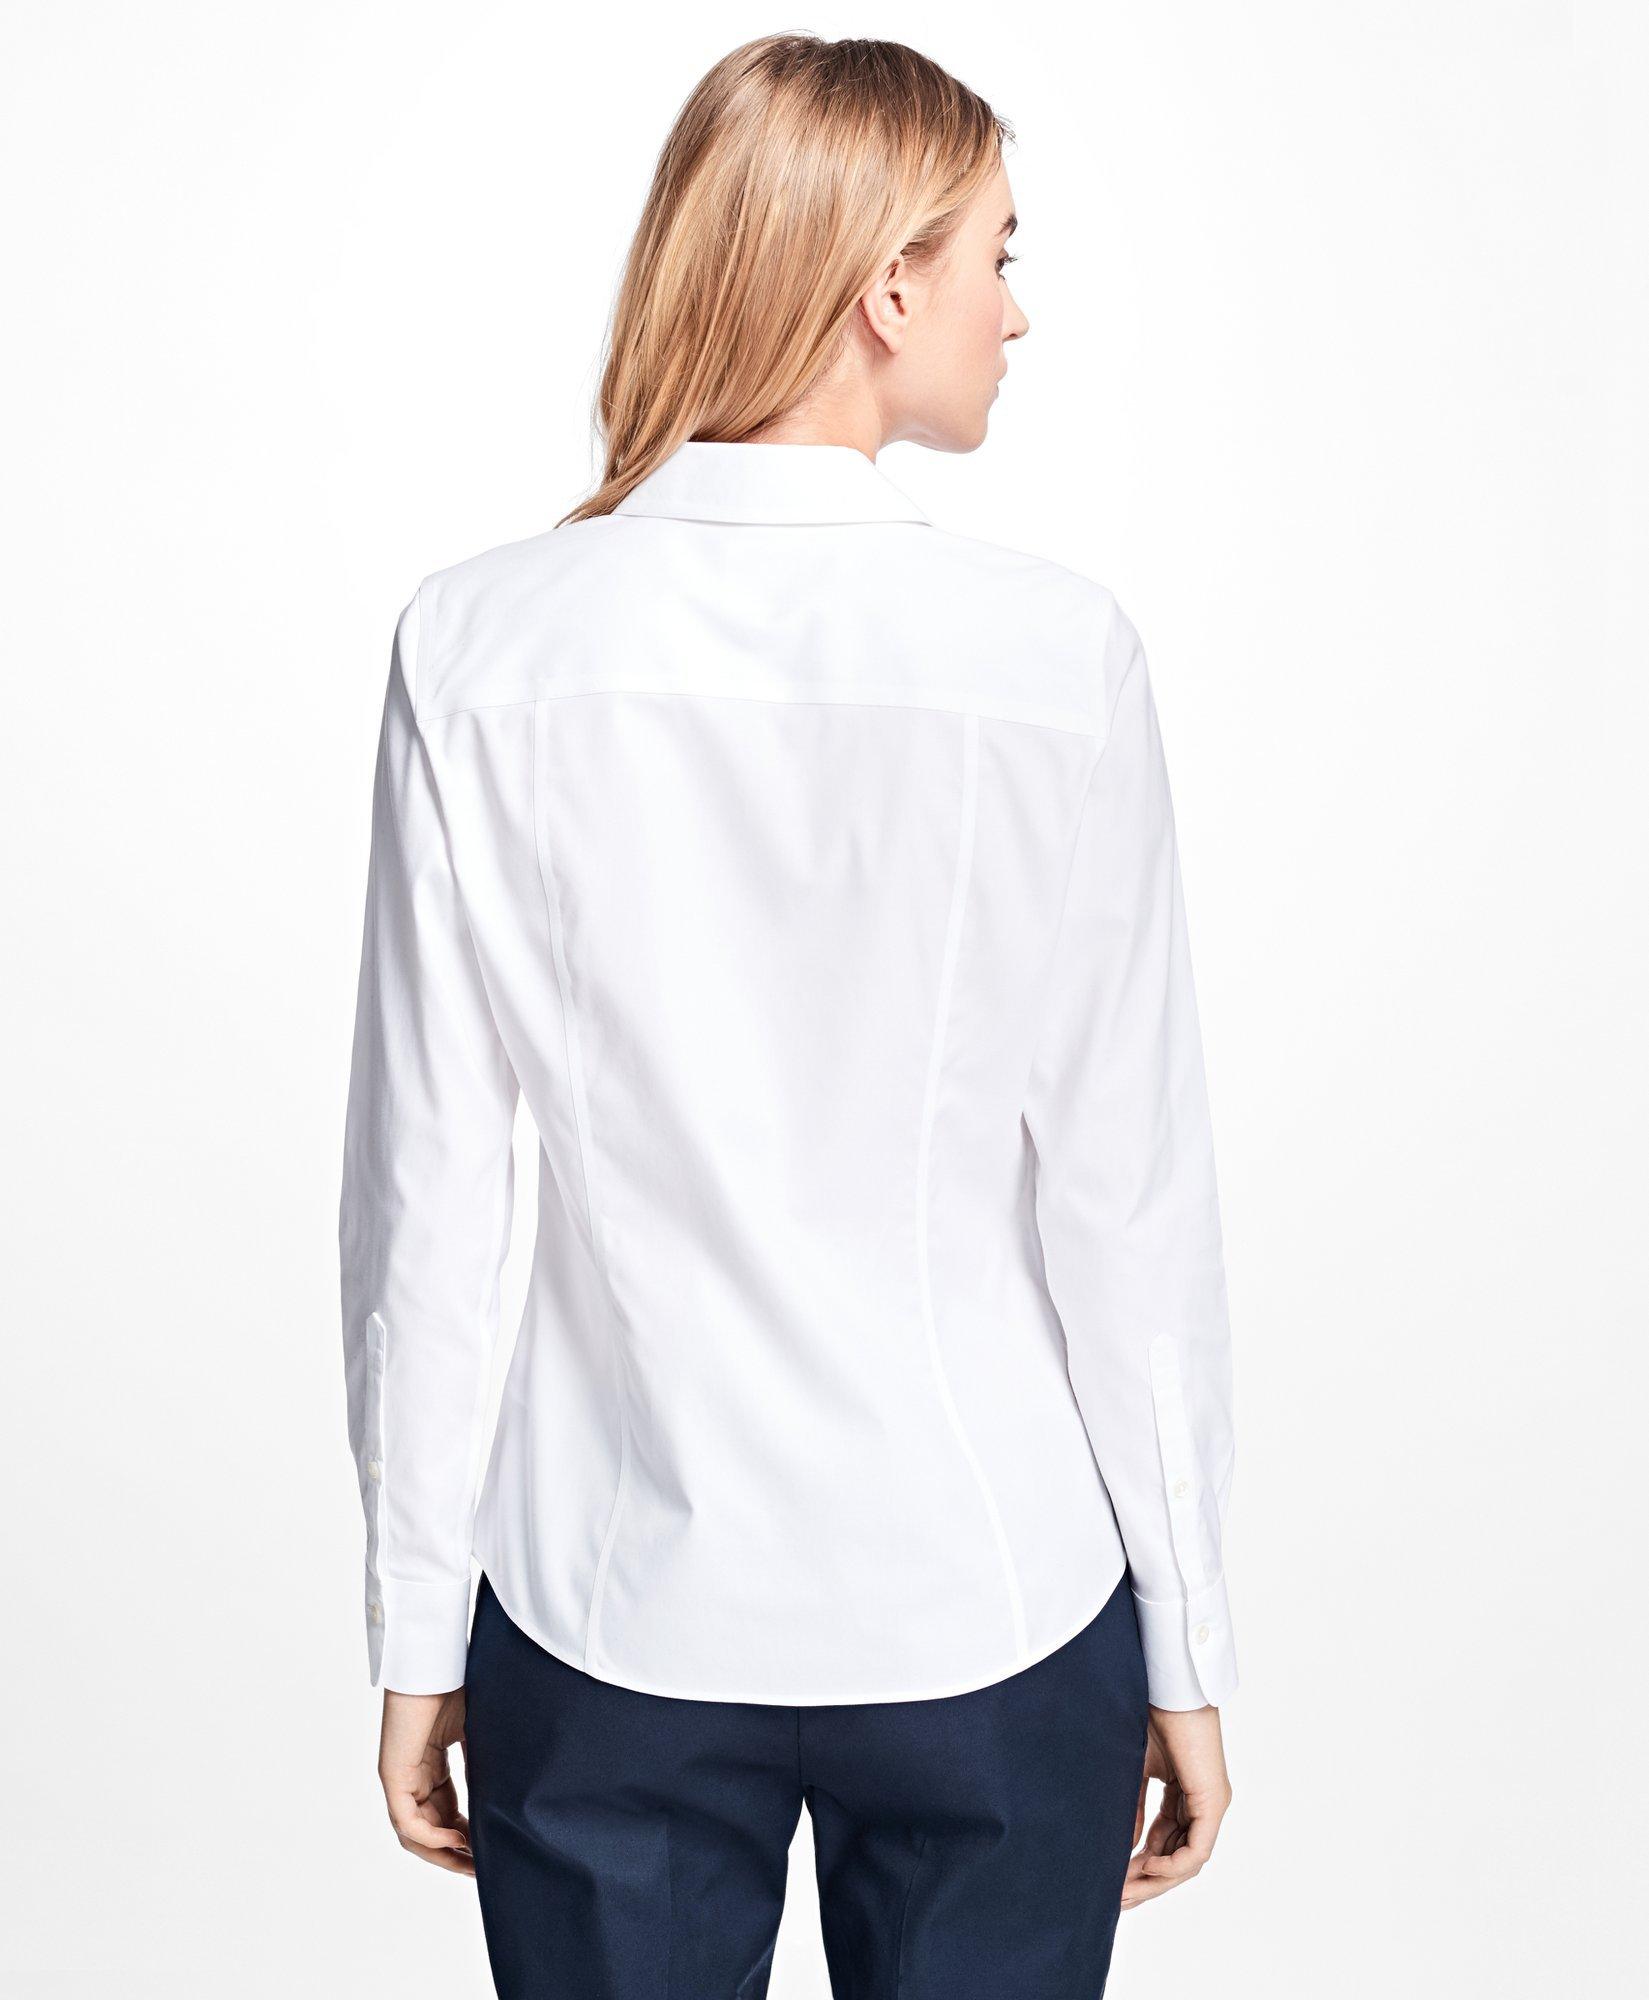 Non-Iron Fitted Dress Shirt